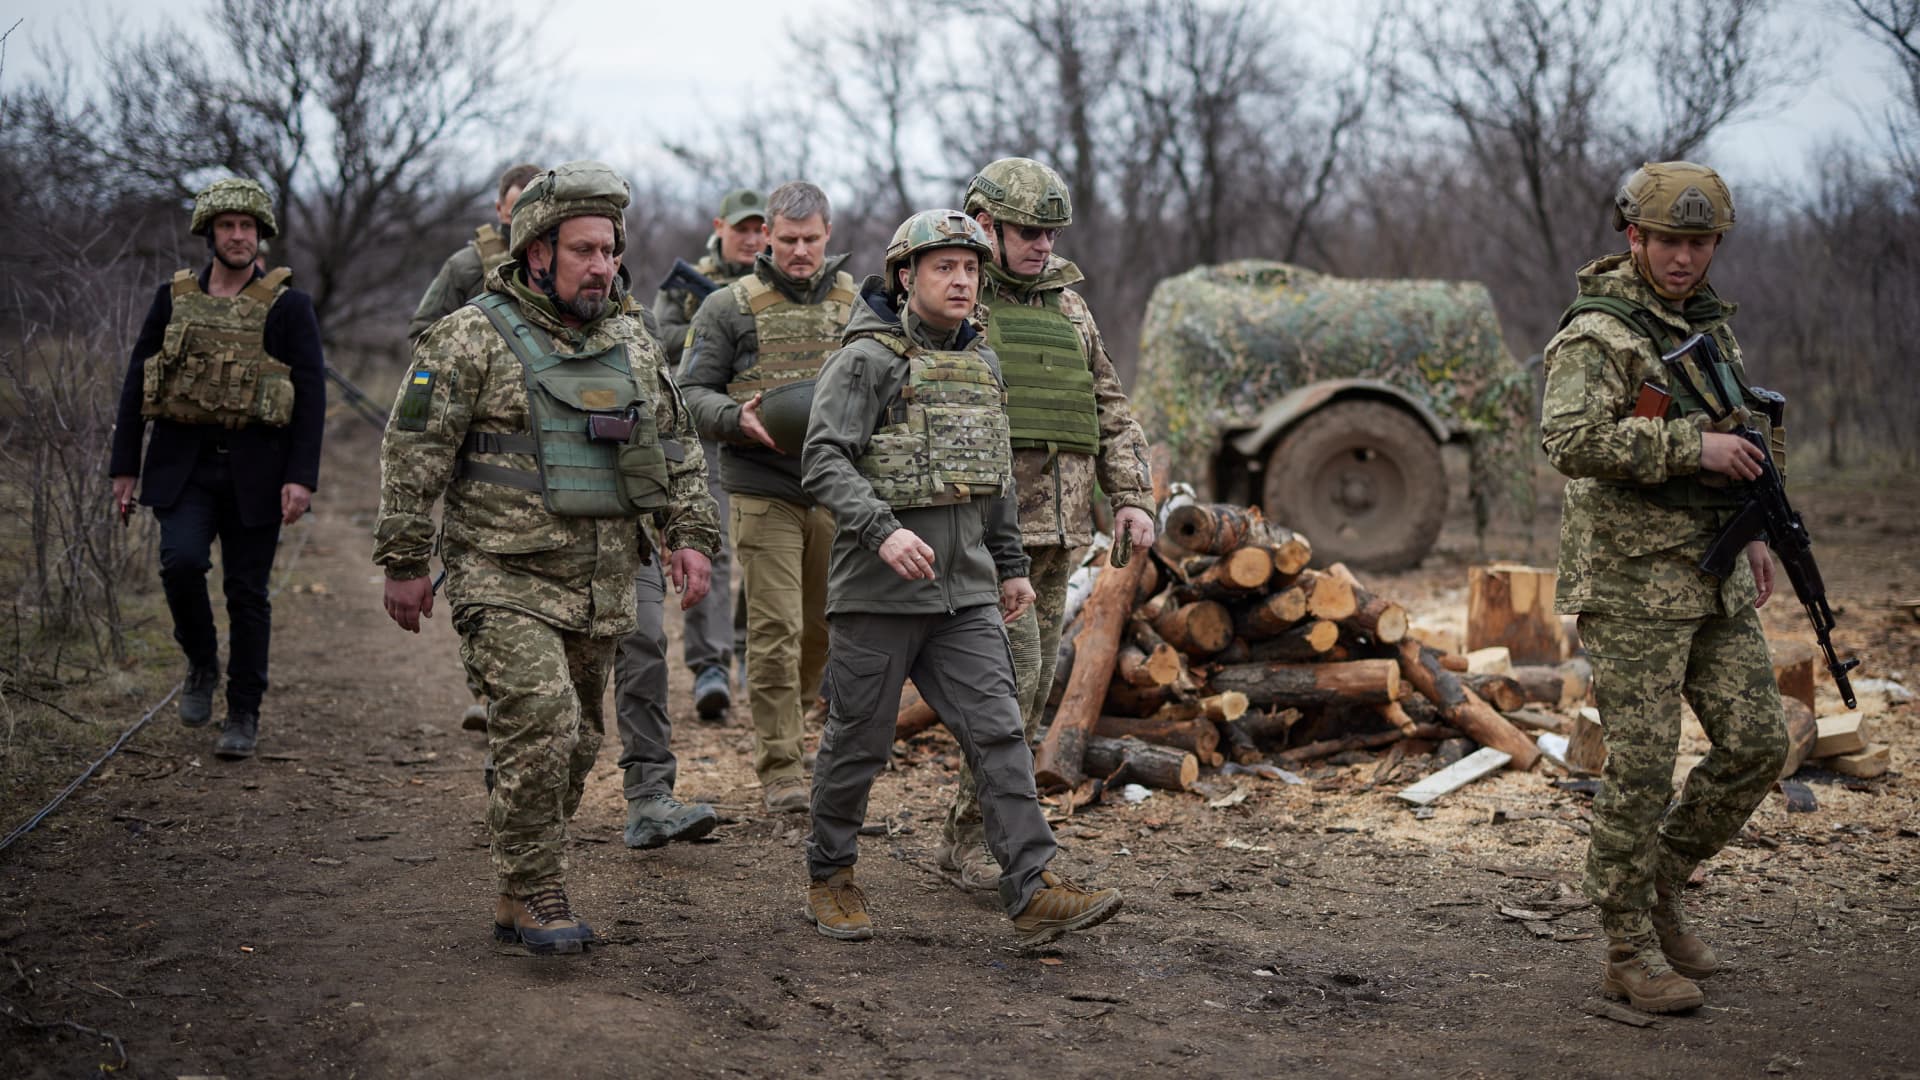 Ukraine's President Volodymyr Zelenskiy visits positions of armed forces near the frontline with Russian-backed separatists during his working trip in Donbass region, Ukraine April 8, 2021.